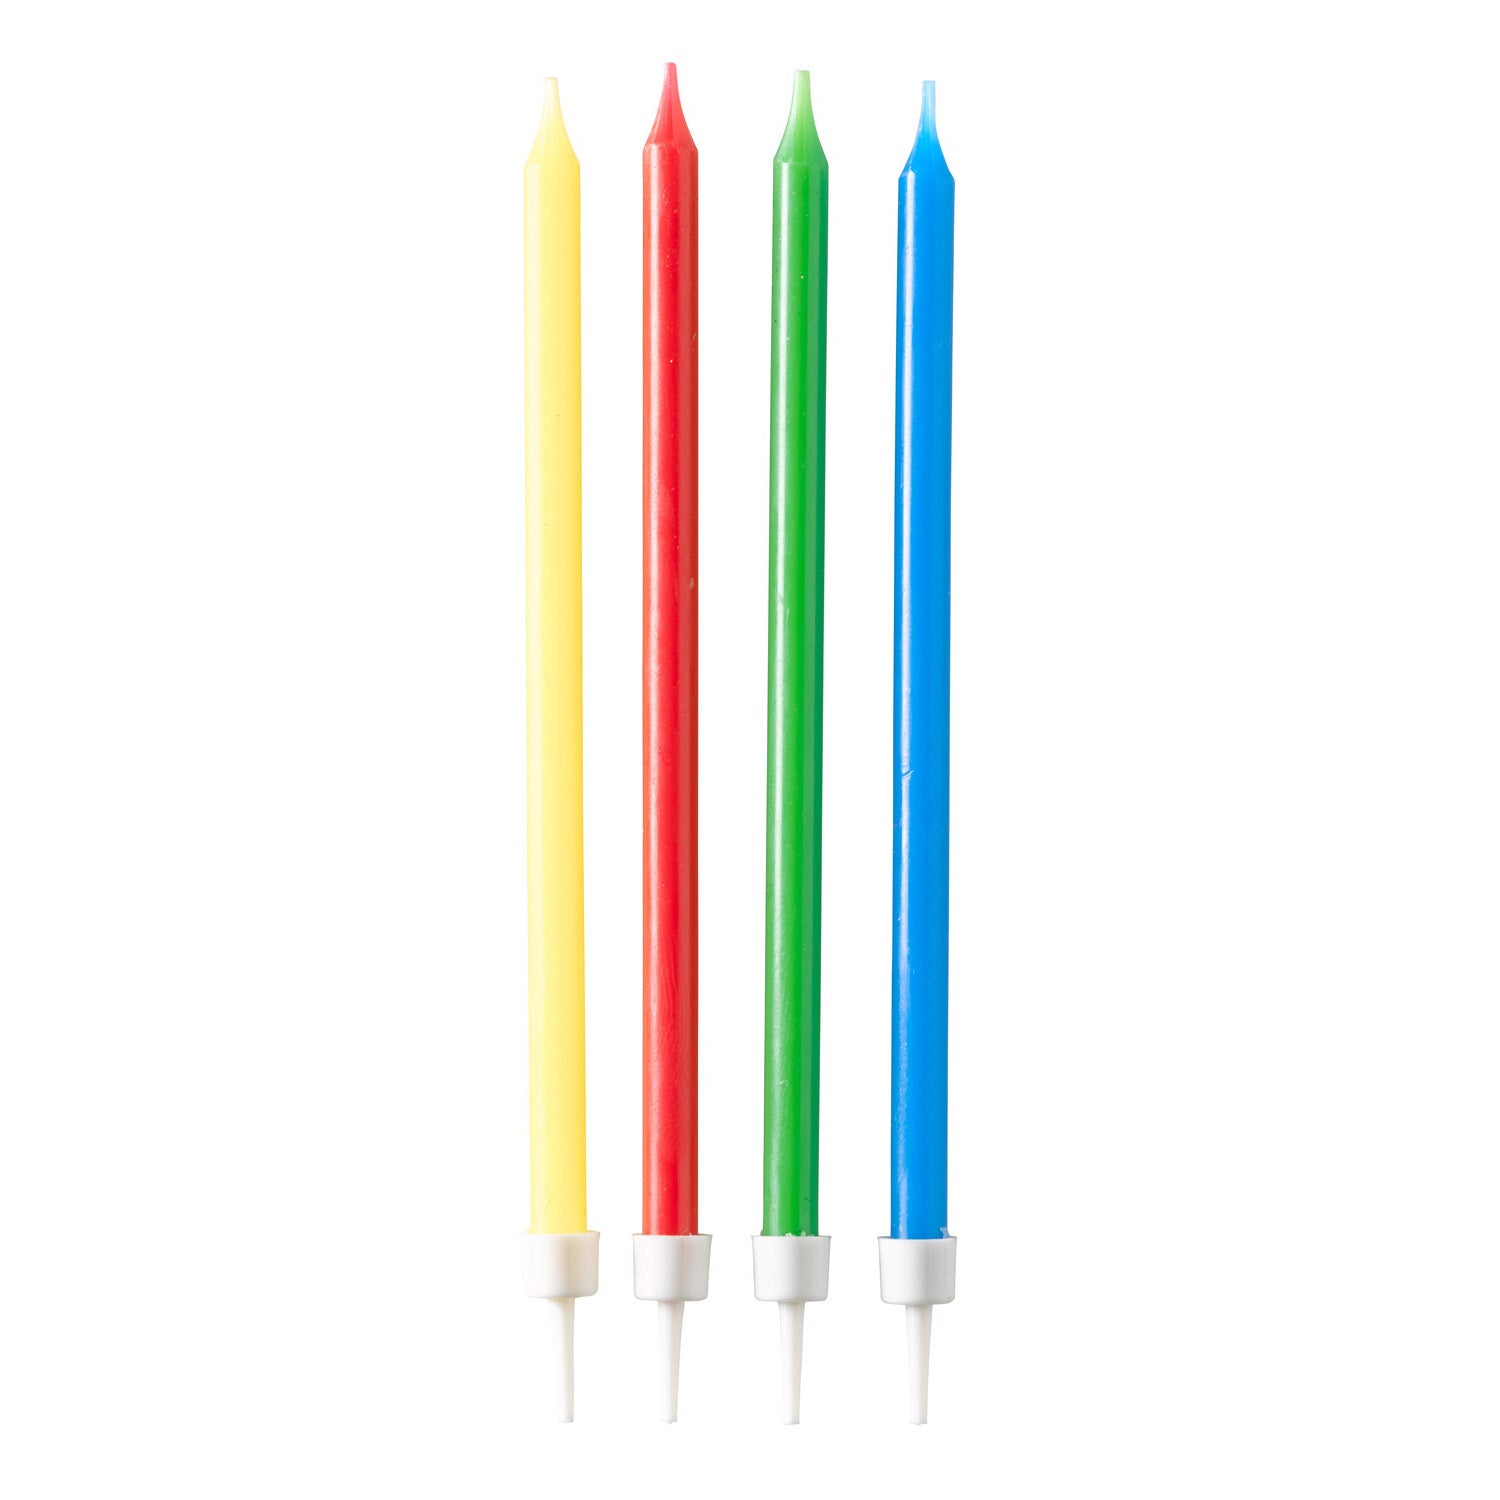 Birth day candle 12 pcs colorful long 12 cm